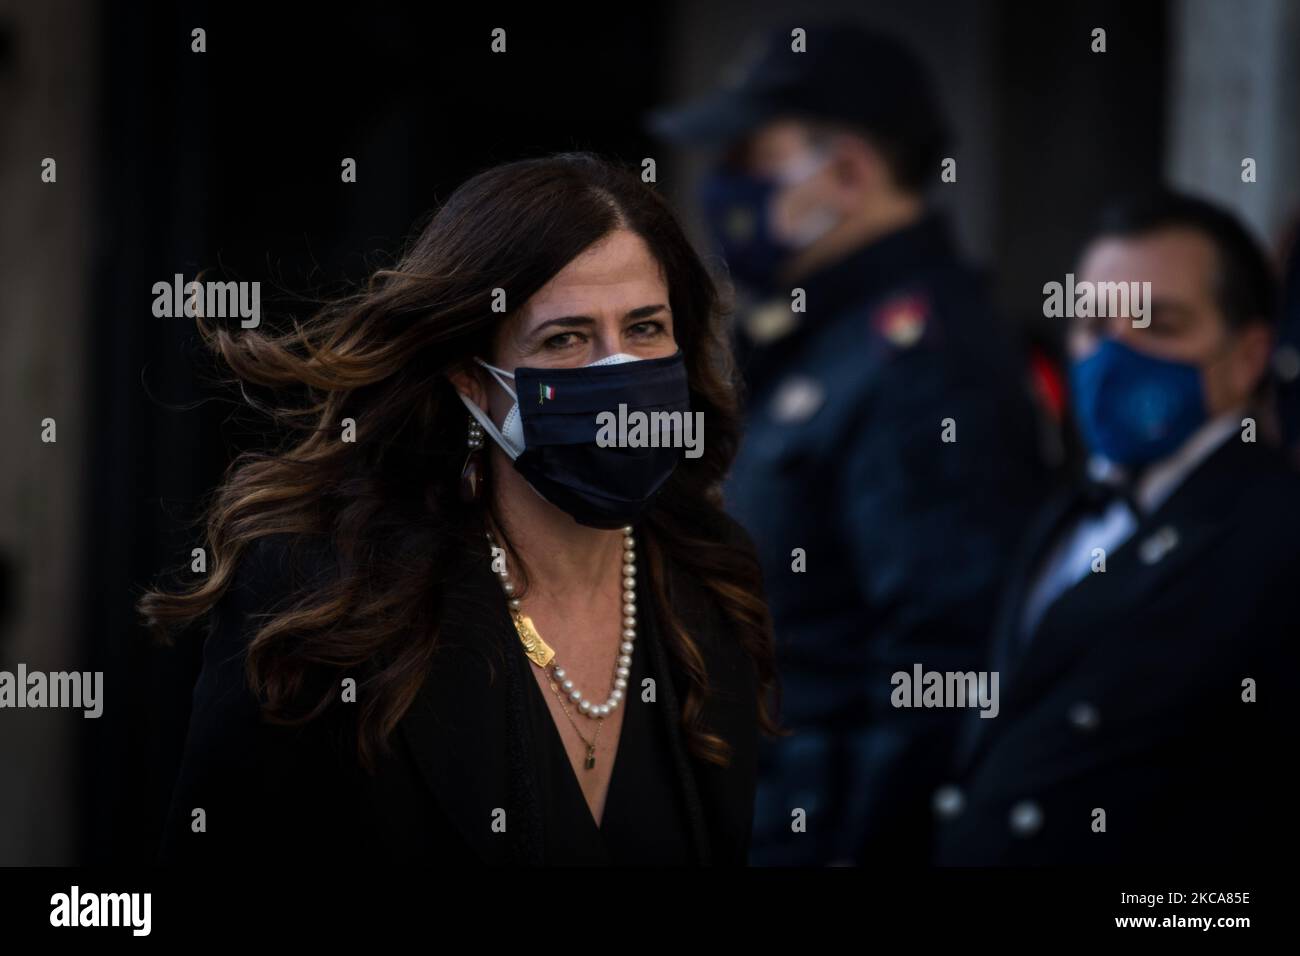 Undersecretary Barbara Floridia arrives at Palazzo Chigi to attend the oath of the Undersecretaries of State, on March 1, 2021 in Rome, Italy (Photo by Andrea Ronchini/NurPhoto) Stock Photo